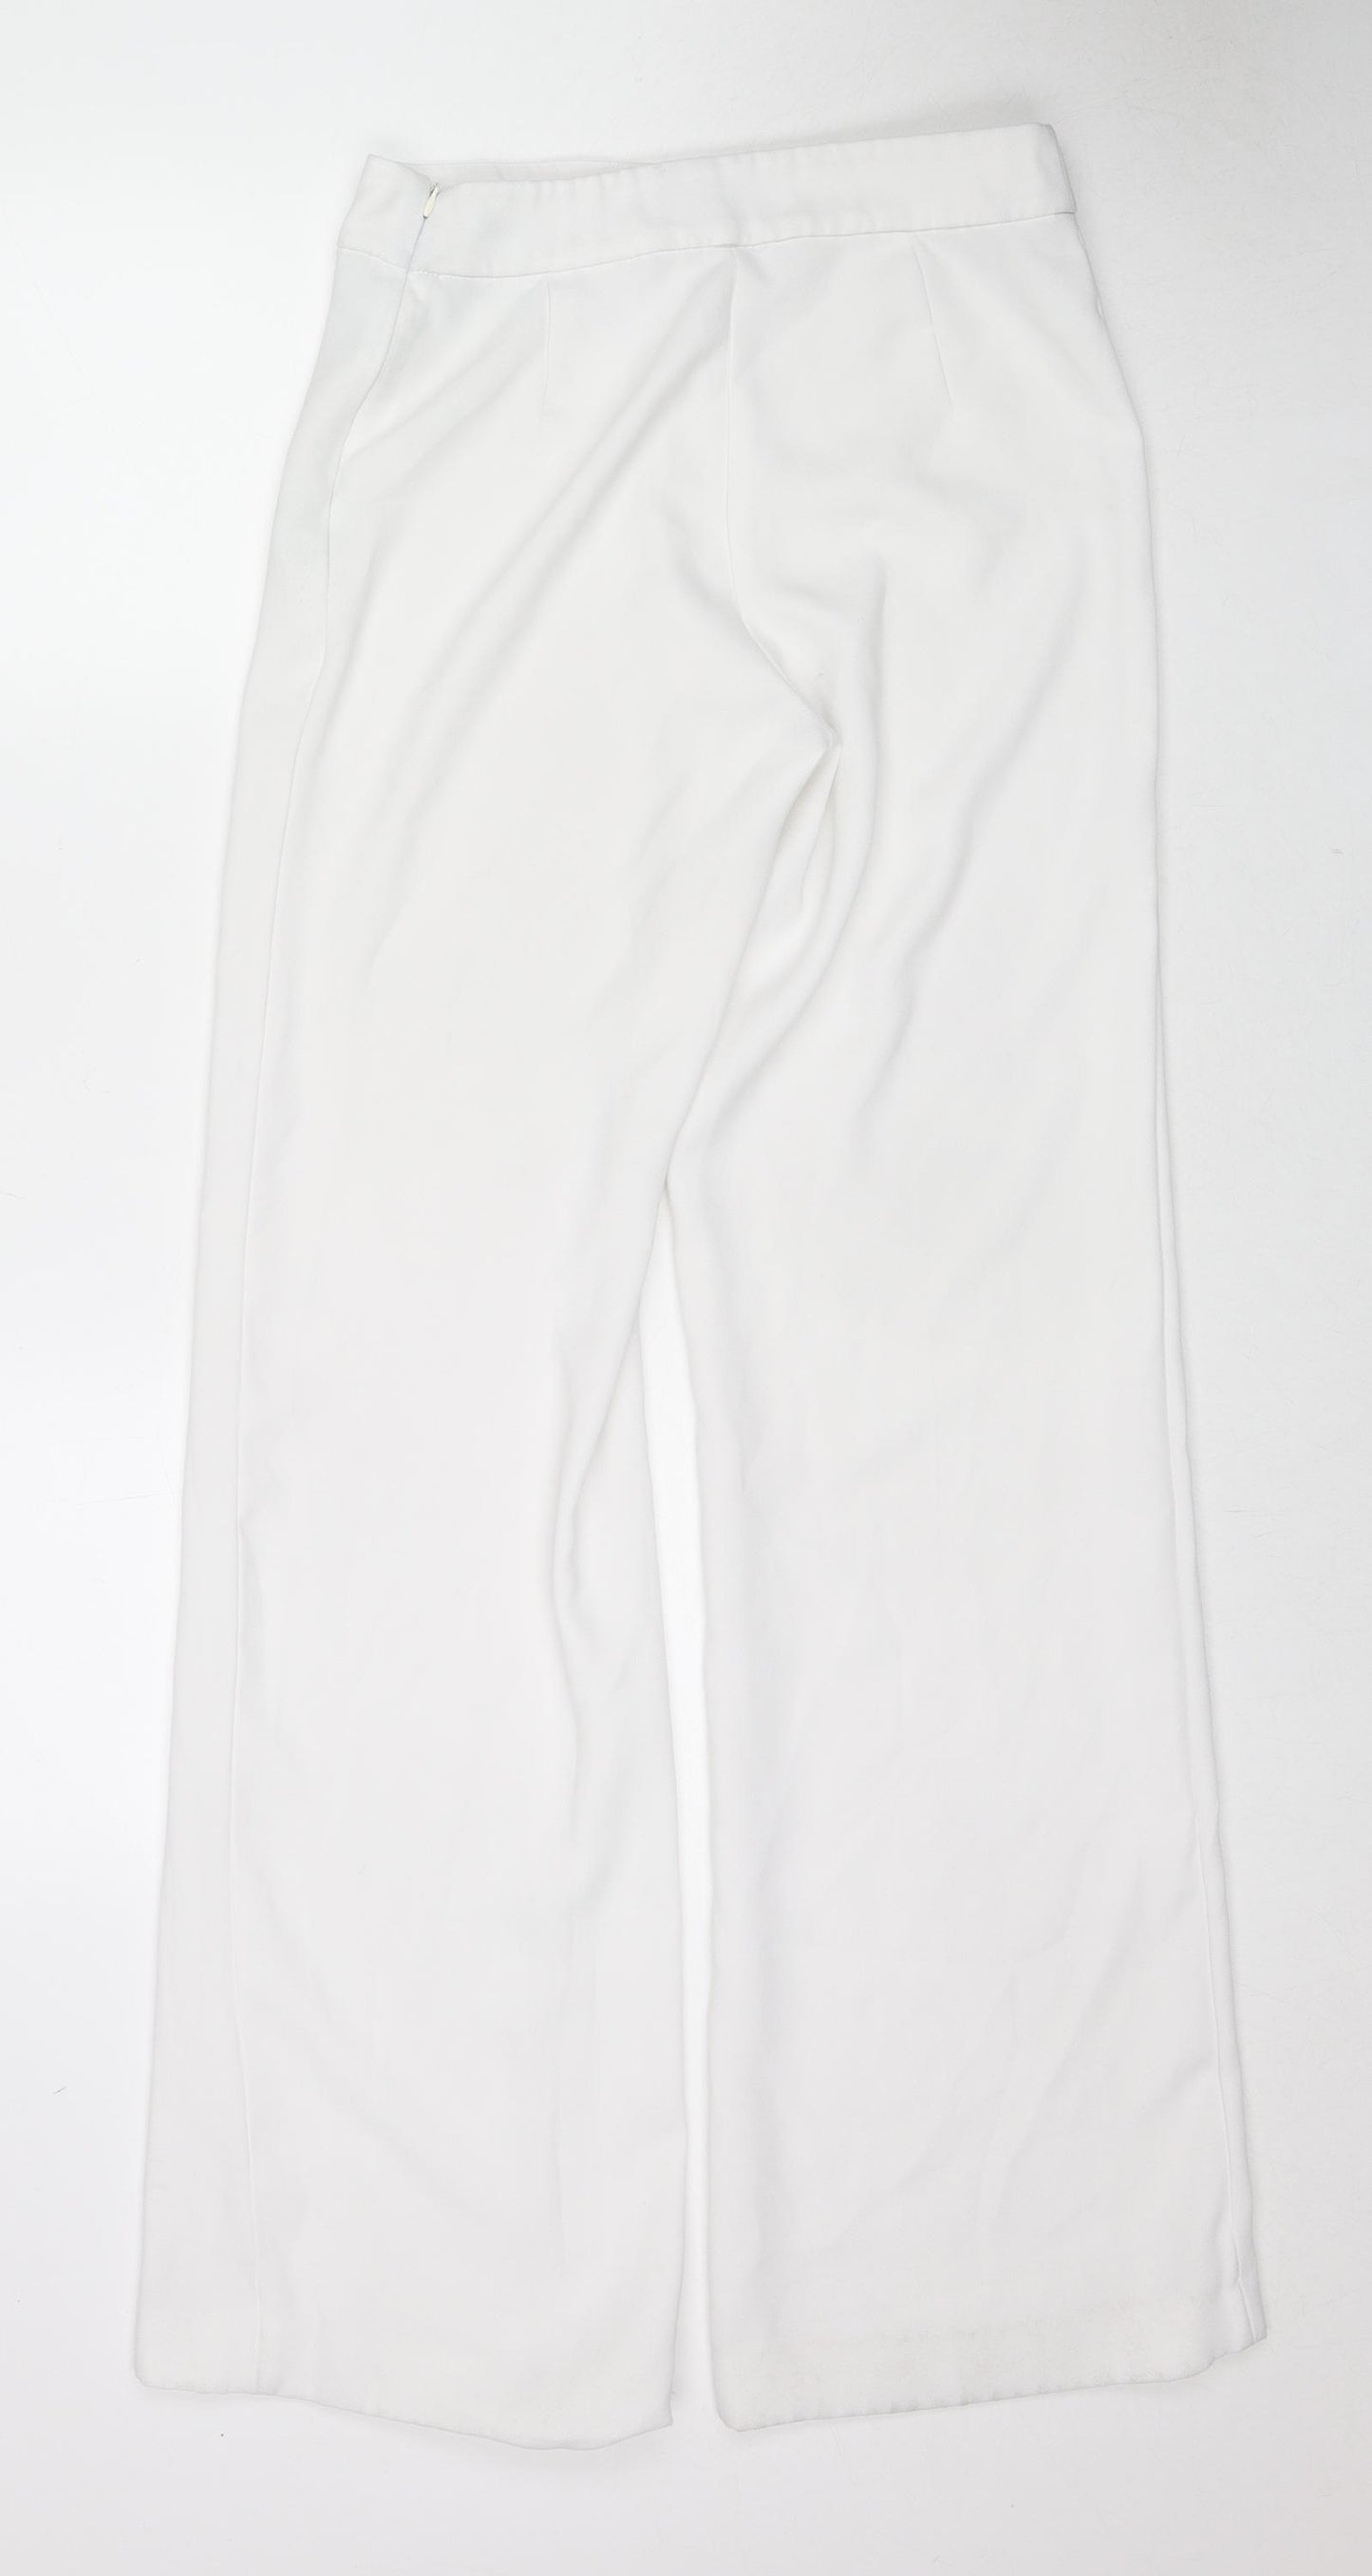 Zara Womens White Polyester Trousers Size S L32 in Regular Zip